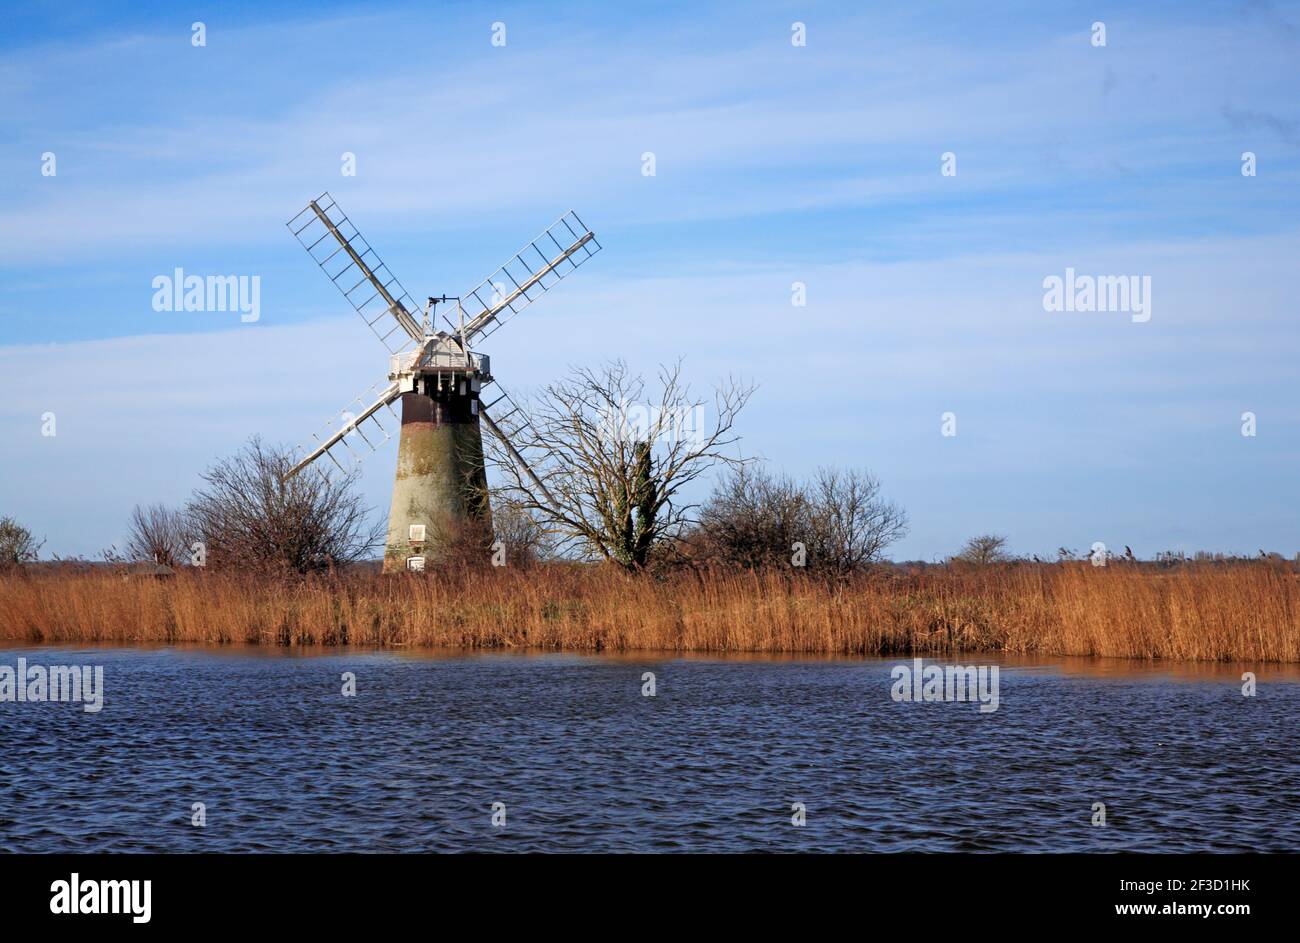 A view of St Benet's Level Drainage Mill on Horning Marshes by the River Thurne viewed from Thurne, Norfolk, England, United Kingdom. Stock Photo